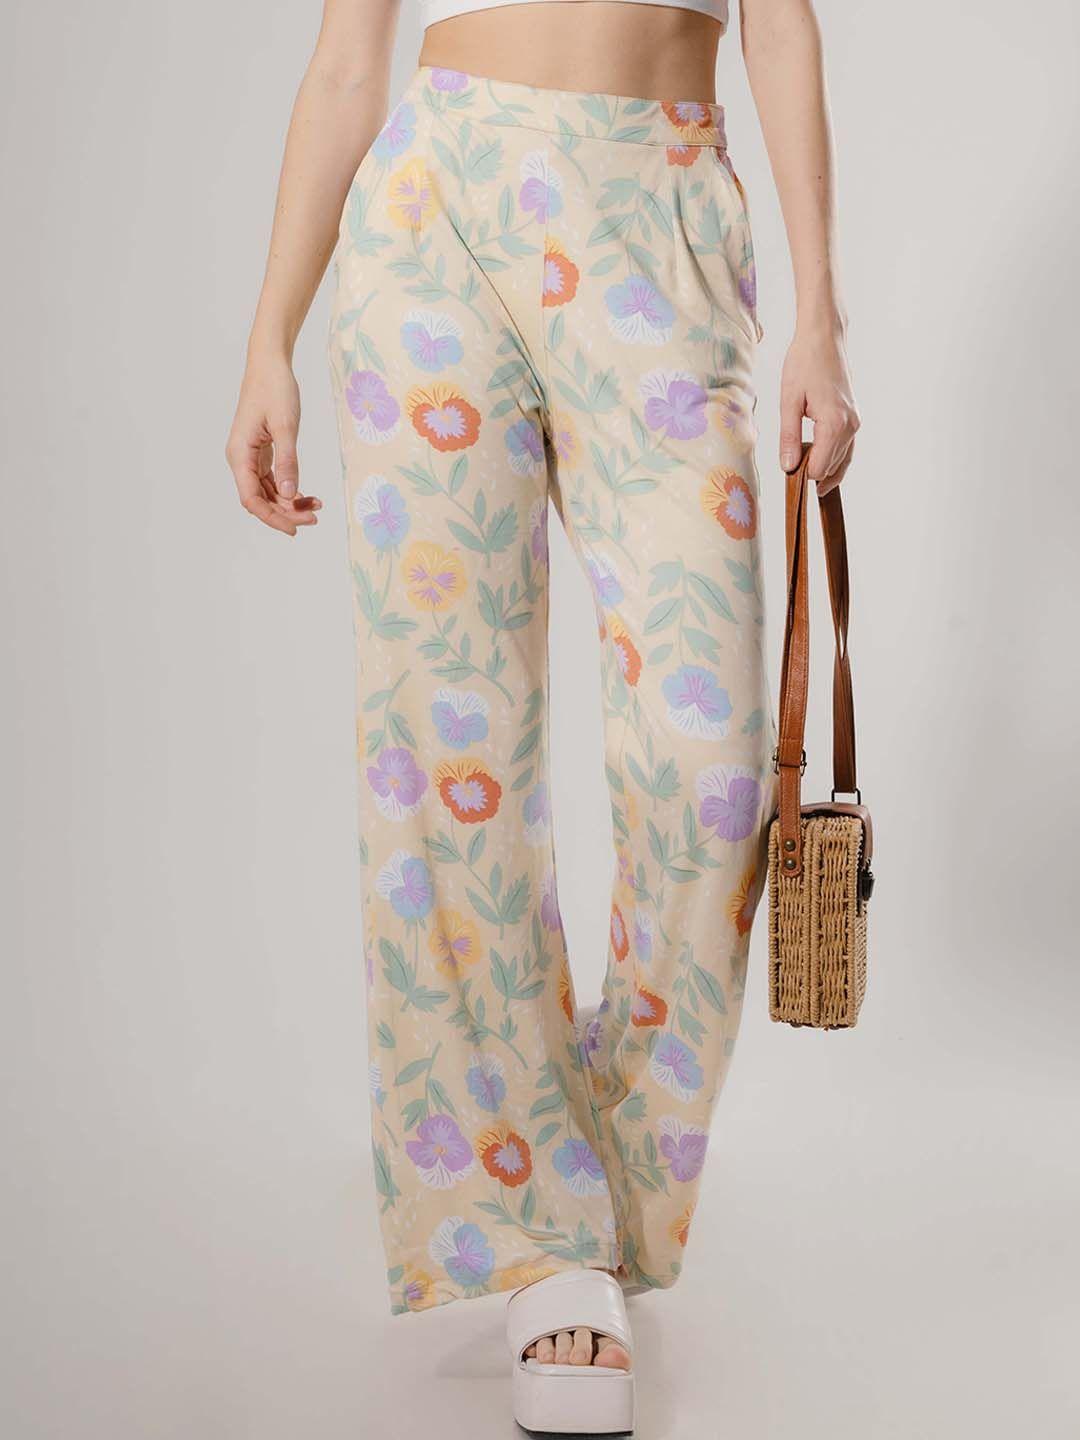 stylecast x hersheinbox women multicoloured floral printed trousers